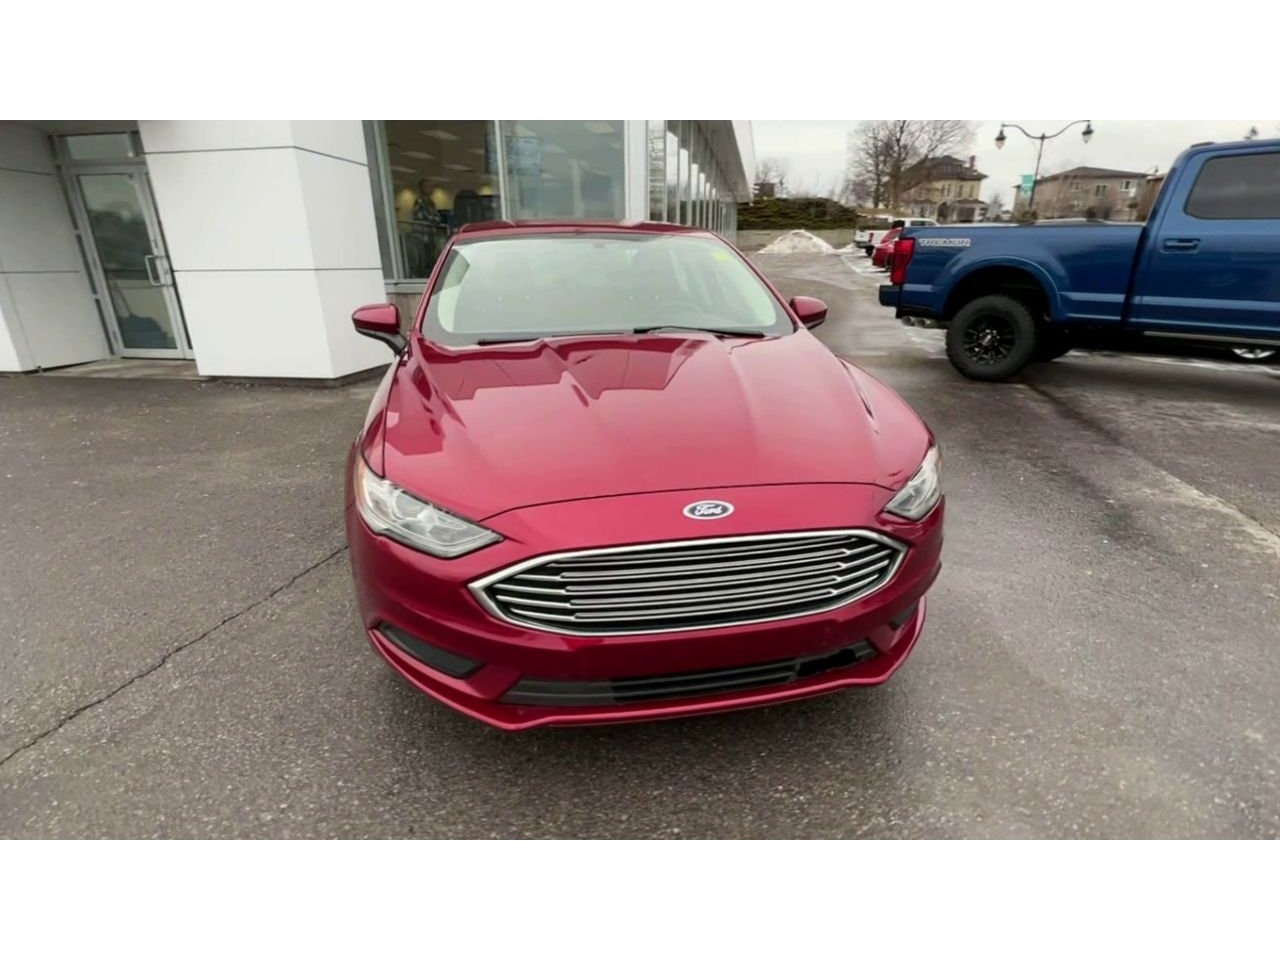 2018 Ford Fusion - P20810 Full Image 3